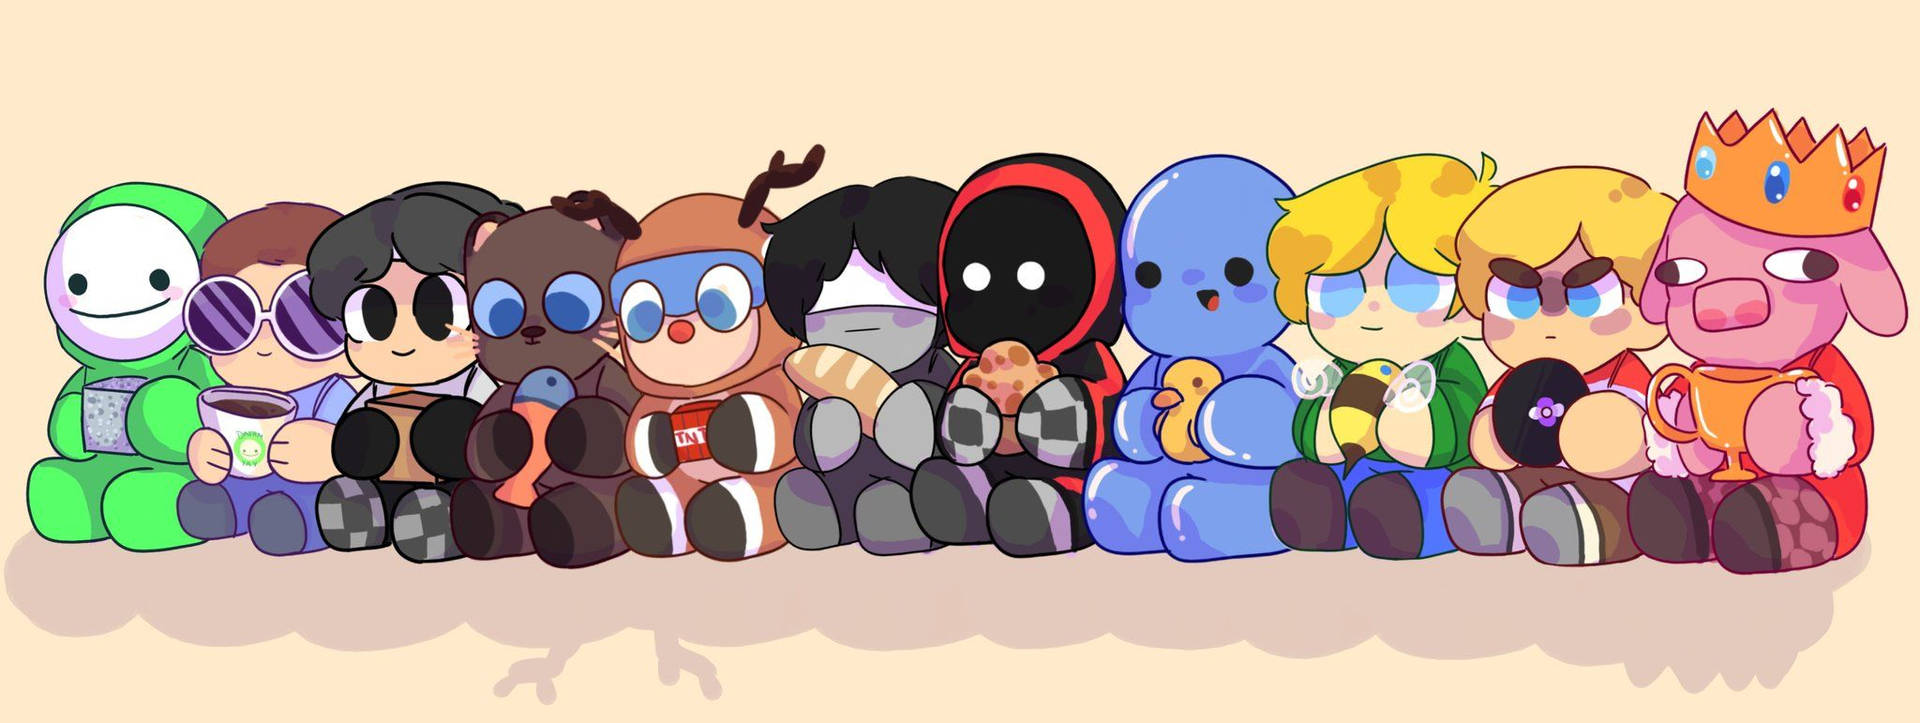 Adorable Mcyt Sitting Characters